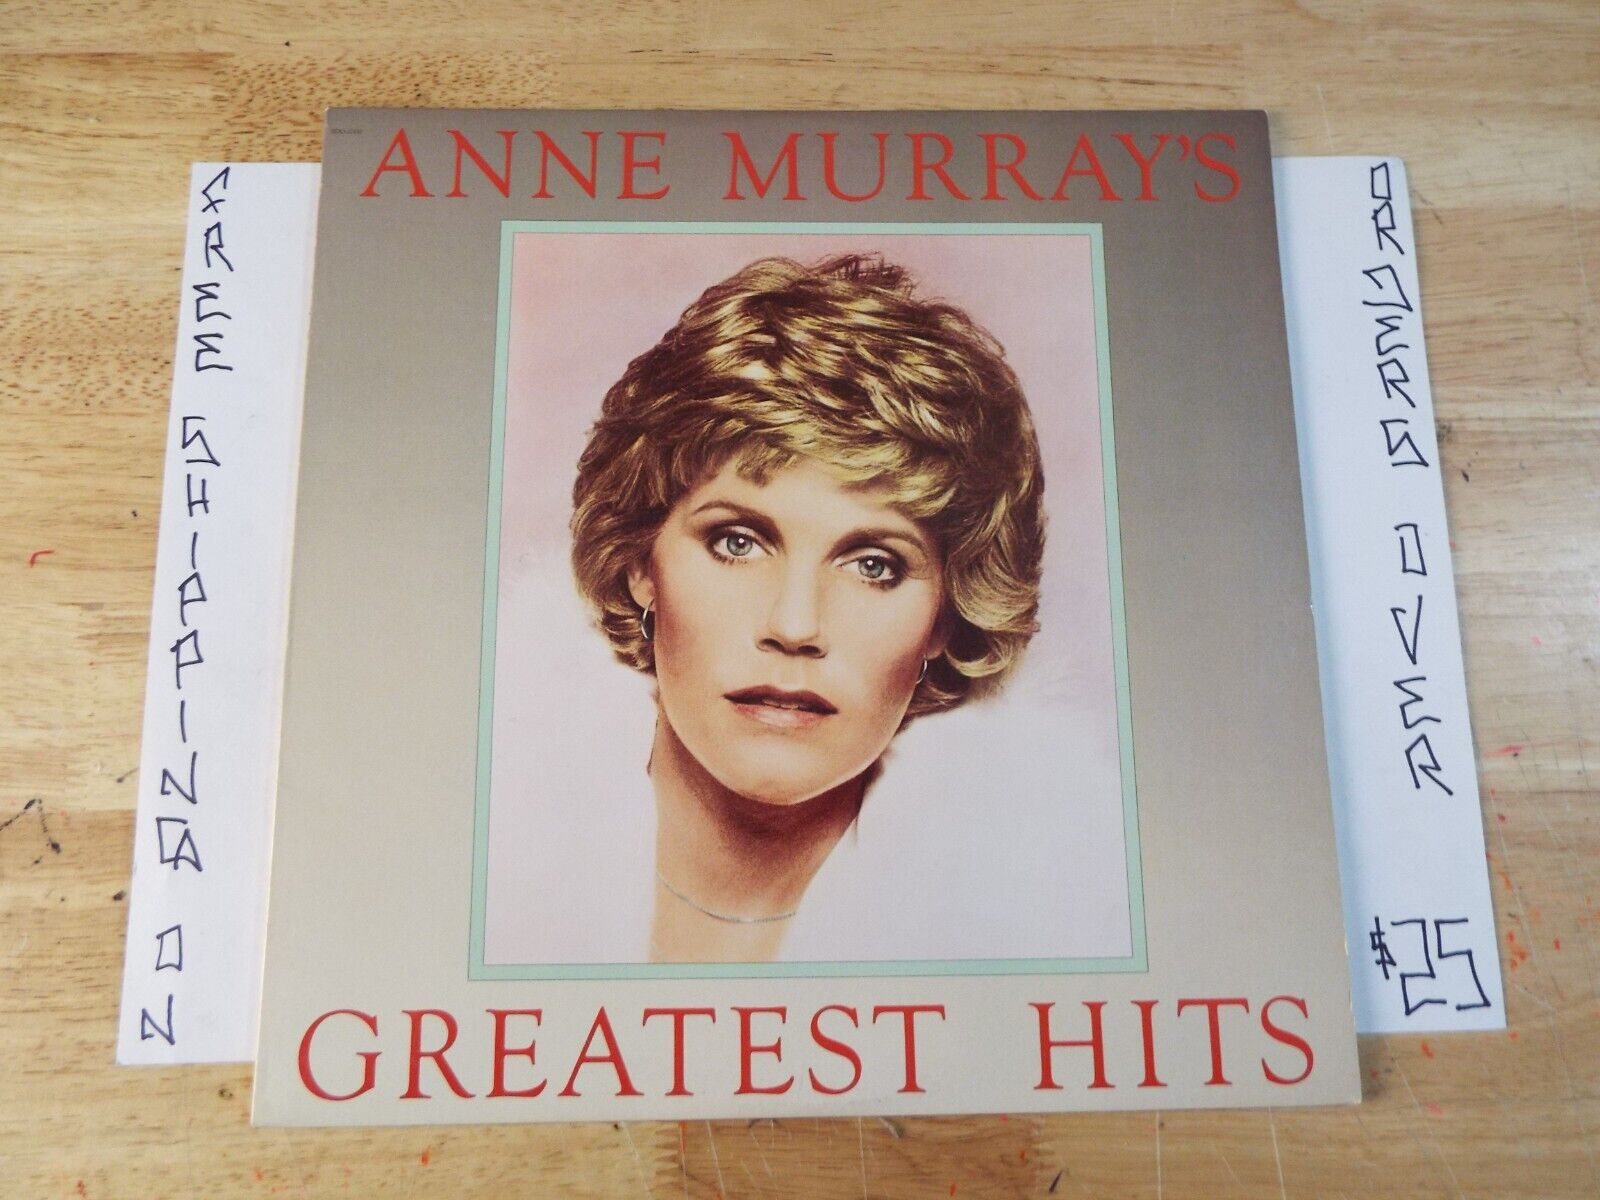 ANNE MURRAY'S GREATEST HITS LP